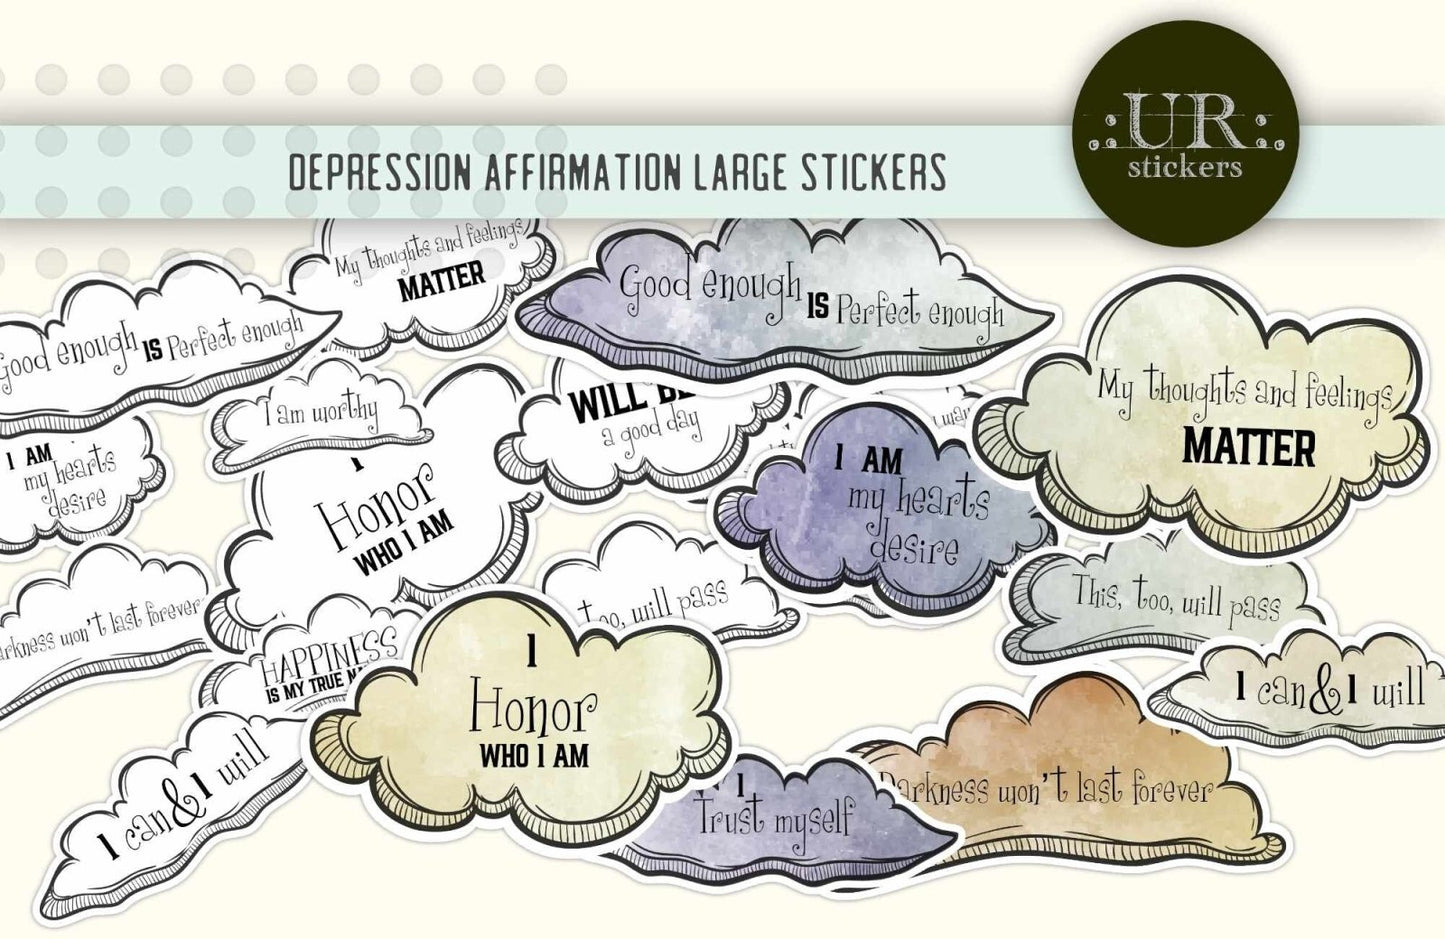 Large Affirmations Stickers - Large Depression Affirmation Stickers - Stickers - UpperRoomPrints